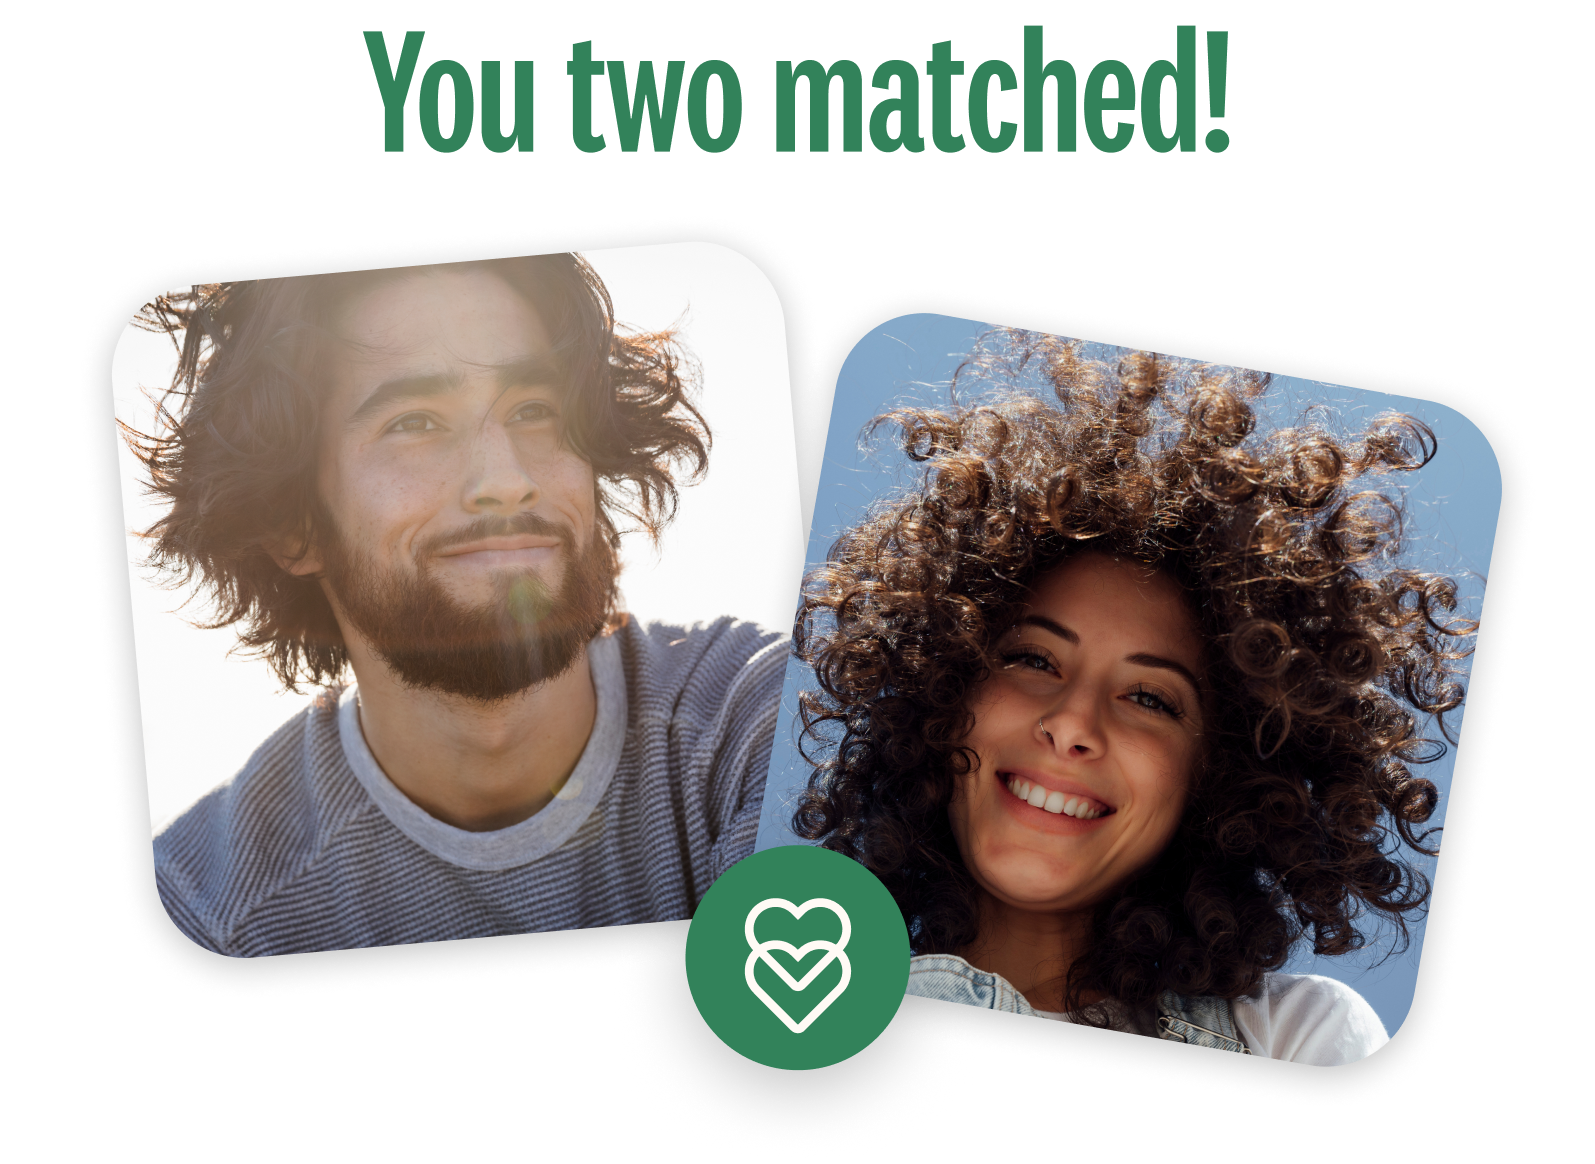 Example of a match between a woman and a man